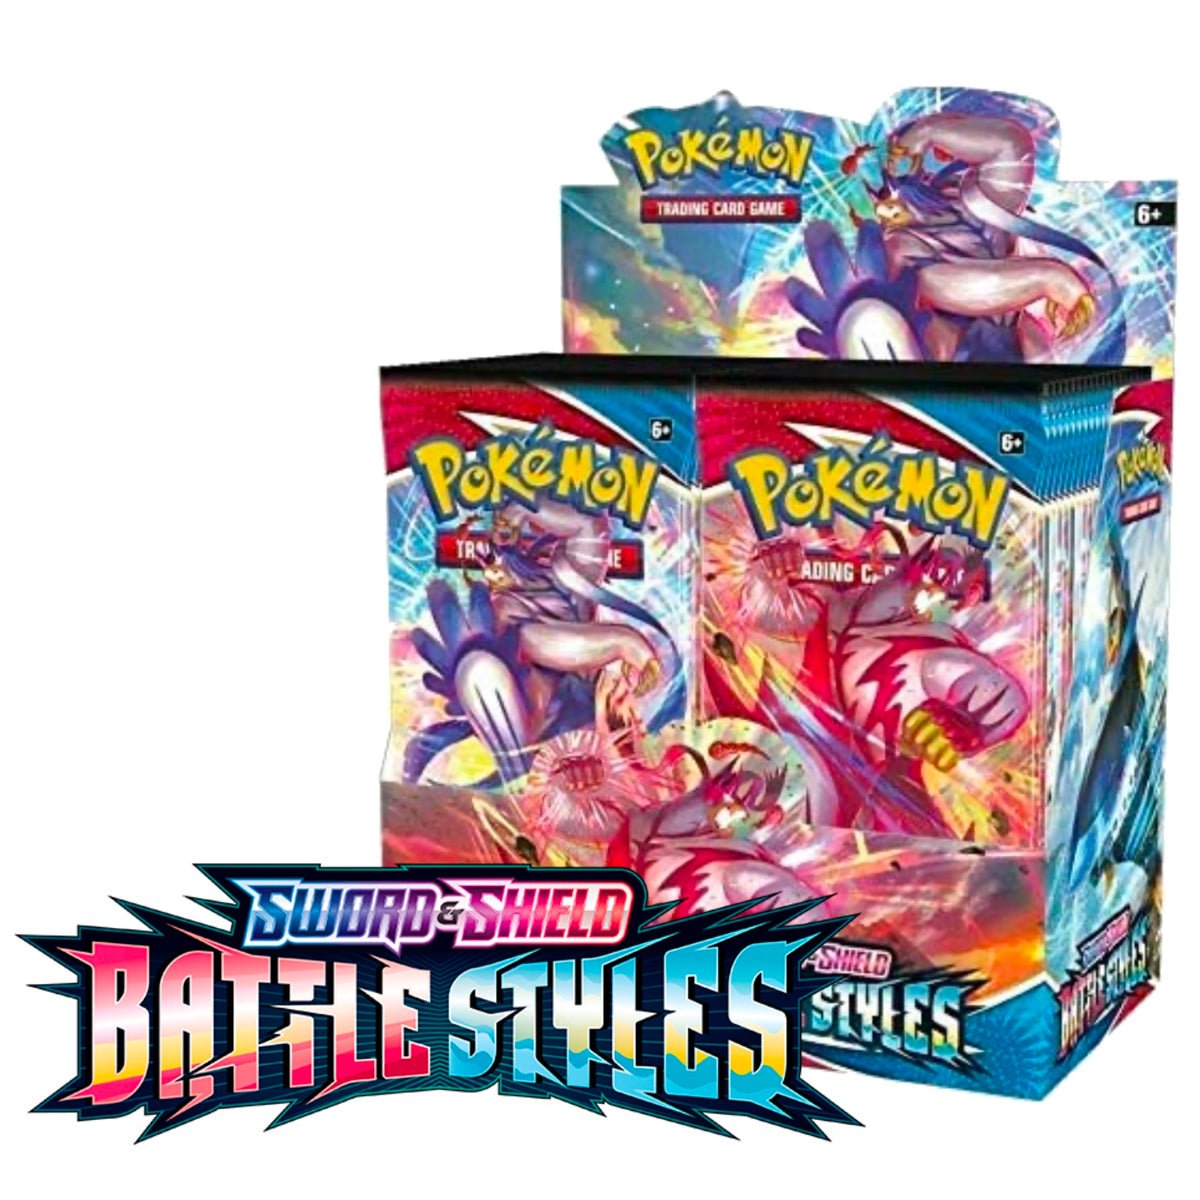 OPENING 3 EPIC POKEMON TCG STEAM SIEGE BOOSTER BOXES!